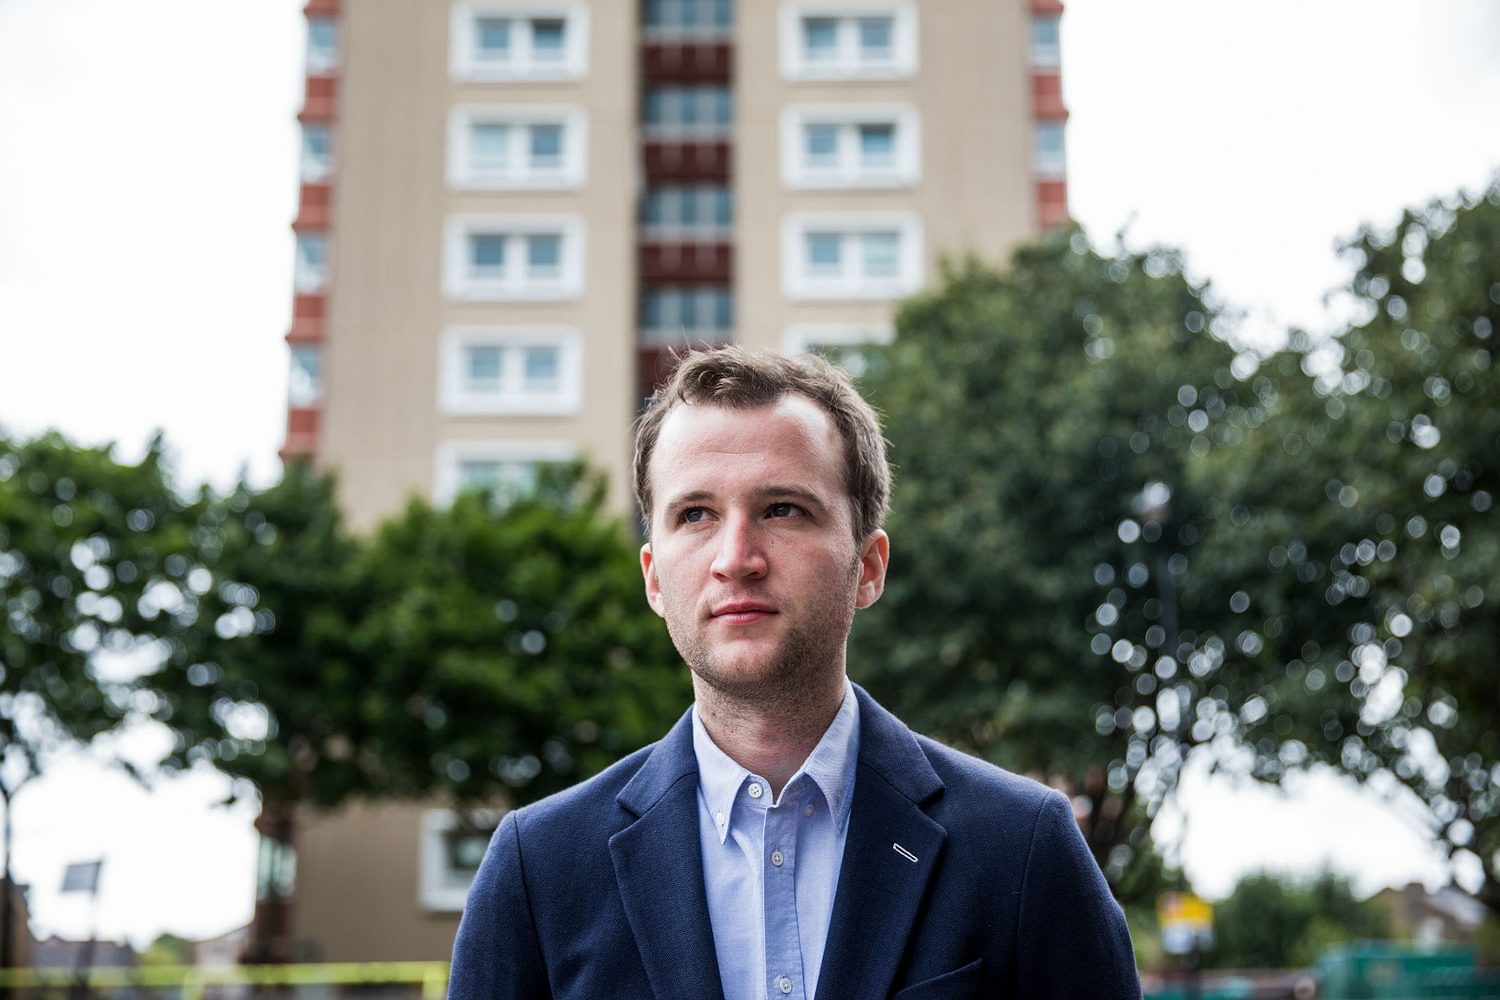 Baio: “I was going for mournful bangers”